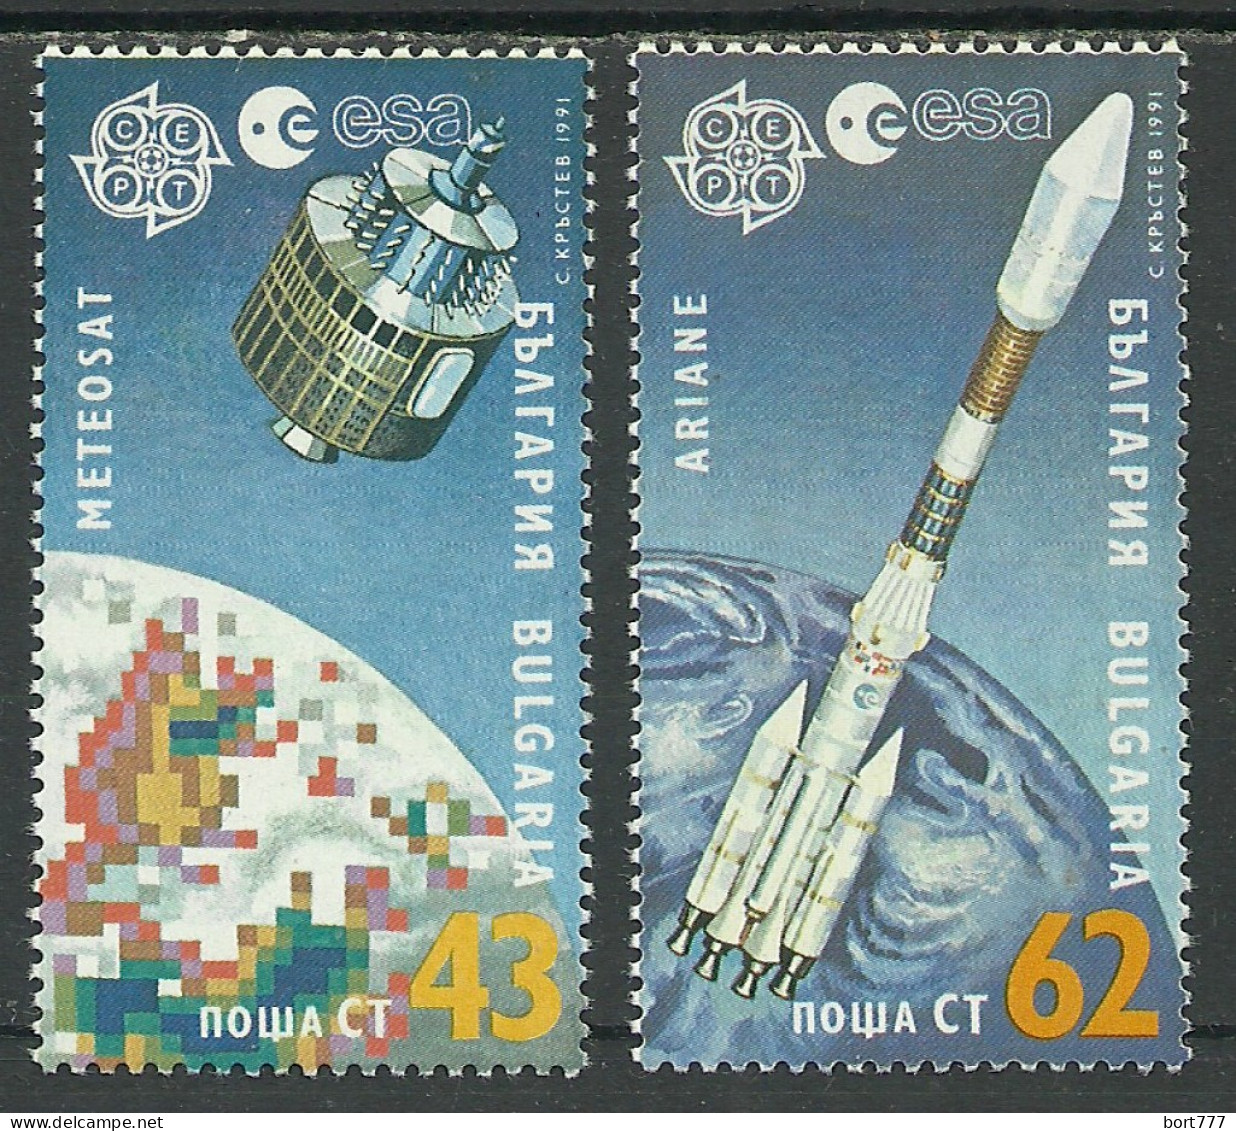 BULGARIA 1991 Year, MNH (**) Set Space - Unused Stamps